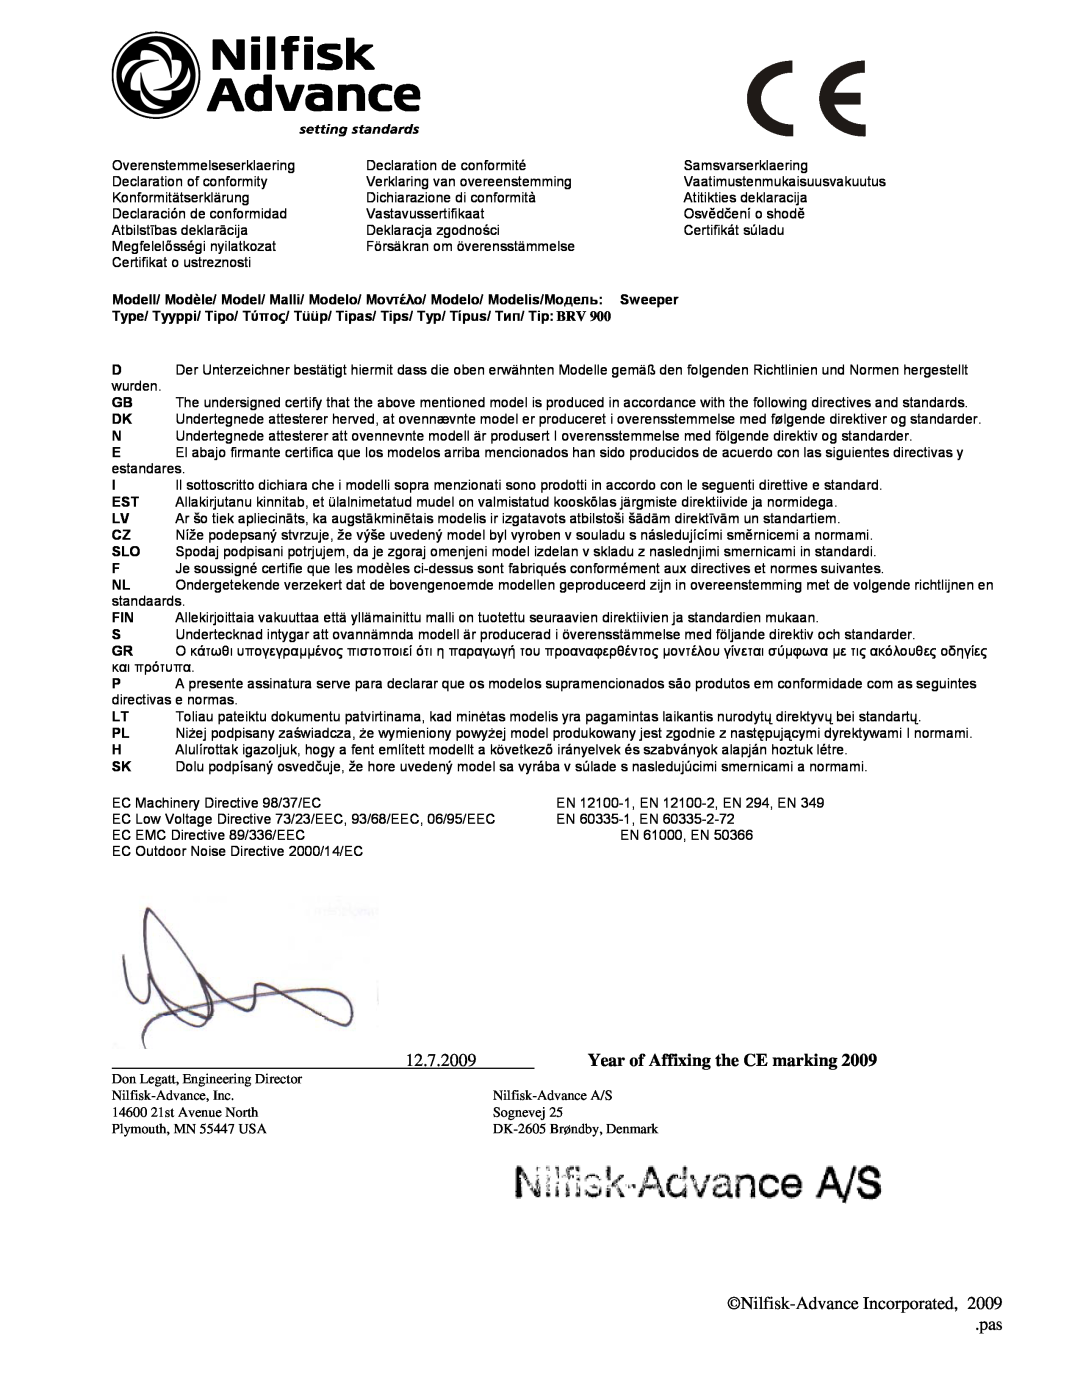 Nilfisk-Advance America 56602002 manual 12.7.2009, Year of Affixing the CE marking, Nilfisk-Advance Incorporated pas 